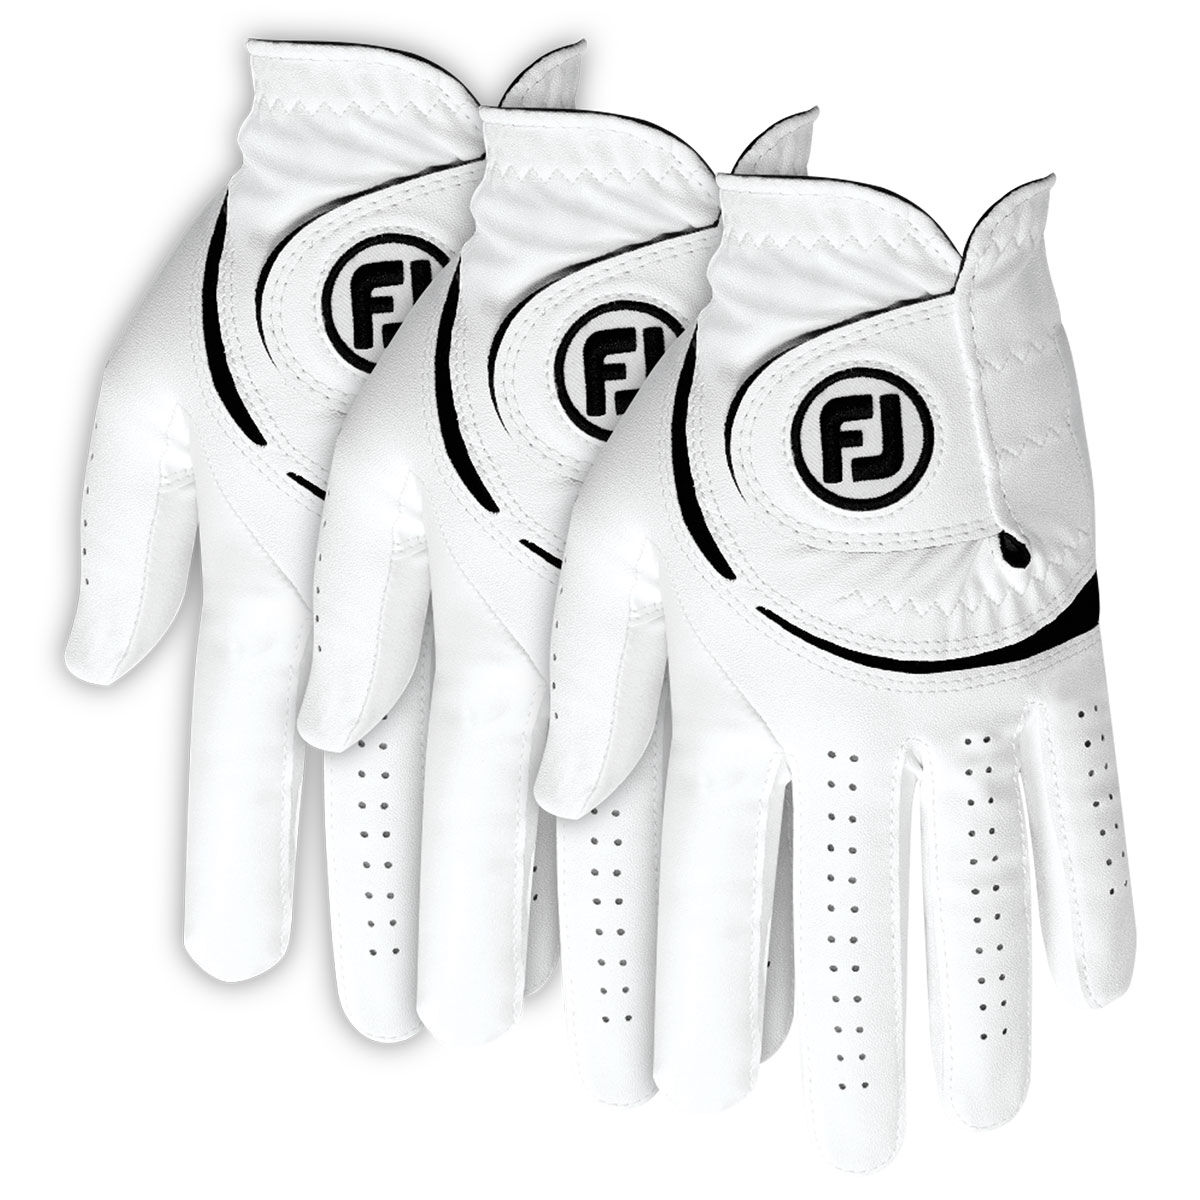 FootJoy Men's Weathersof Golf Glove - 3 Pack, Mens, Left hand, Medium/large, White | American Golf - Father's Day Gift von FootJoy